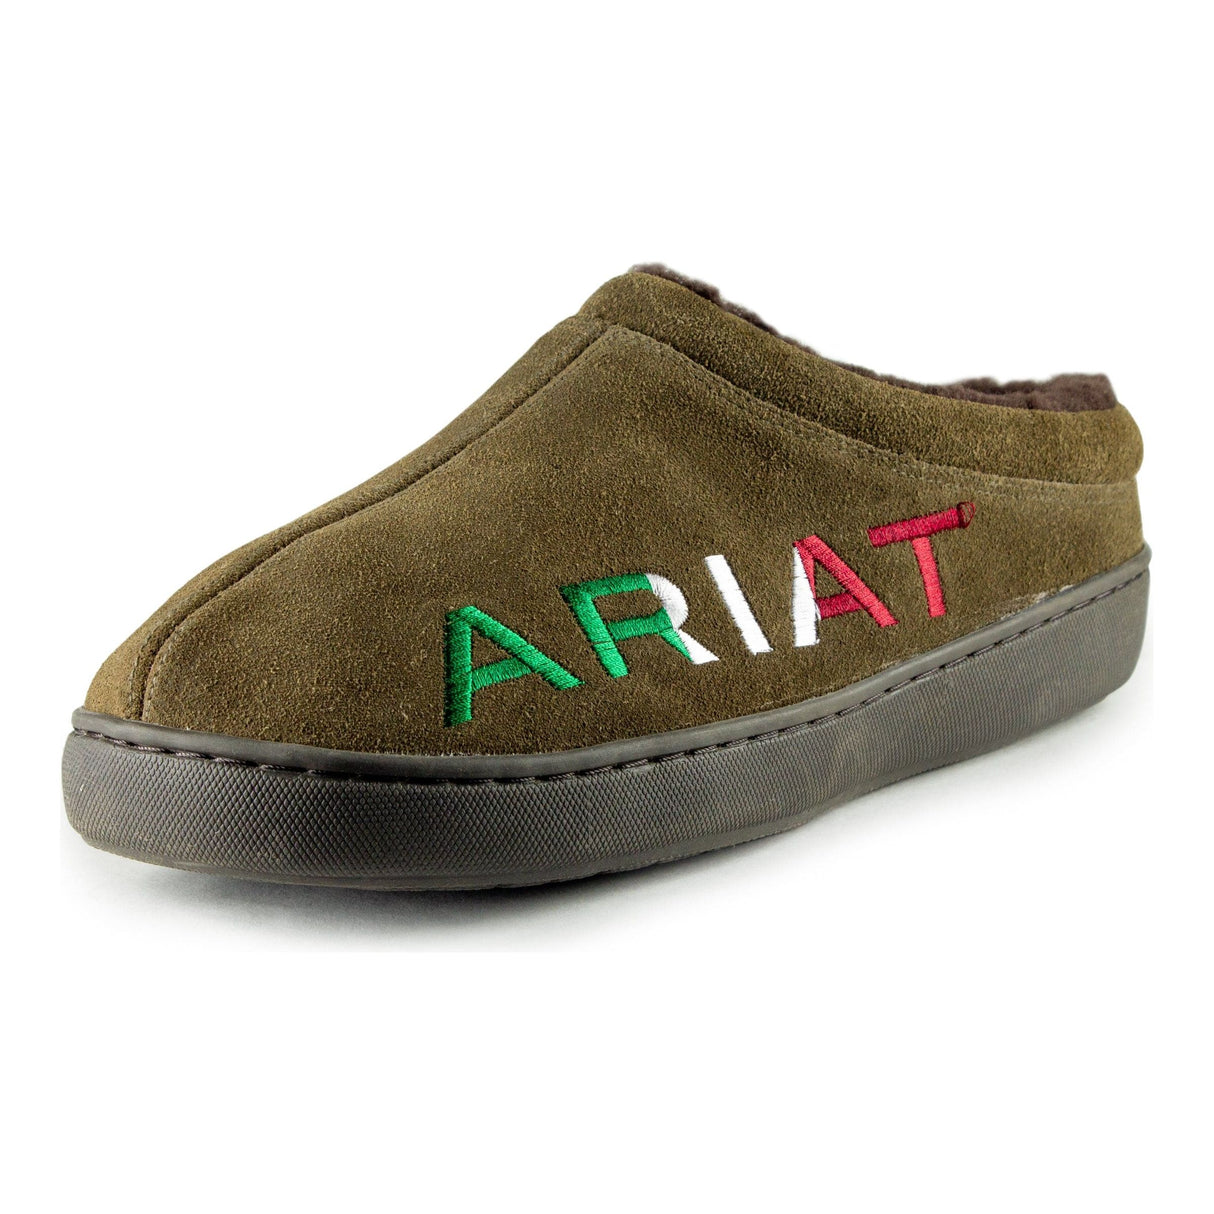 Ariat Mens Suede Clog Slippers with Ariat Logo  -  M8 / Stone Mexico